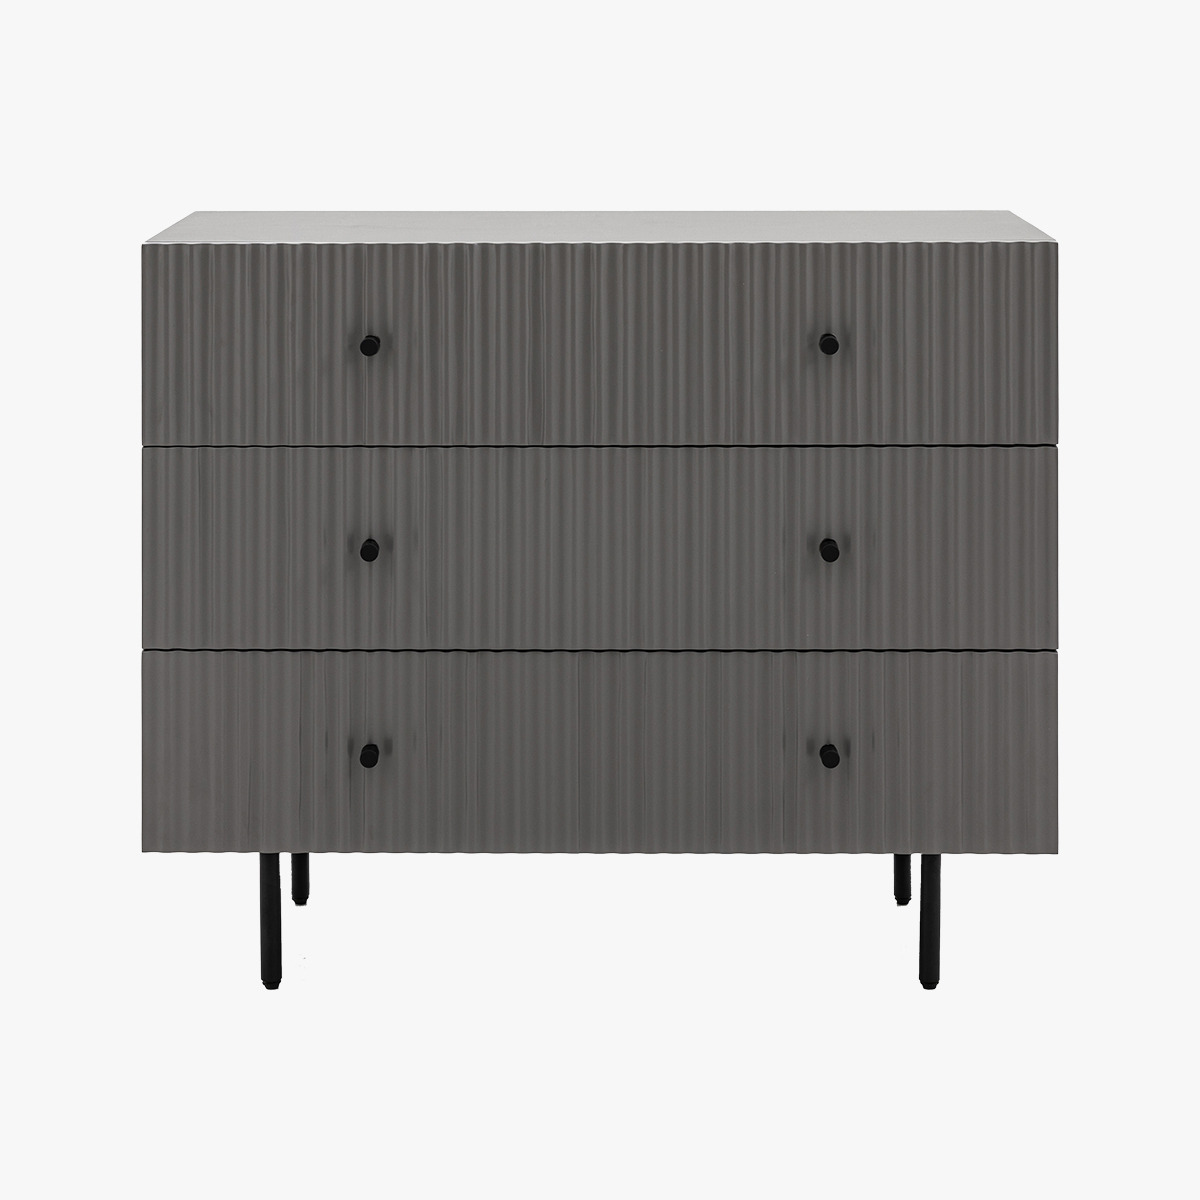 Ridge Chest of Drawers in Grey